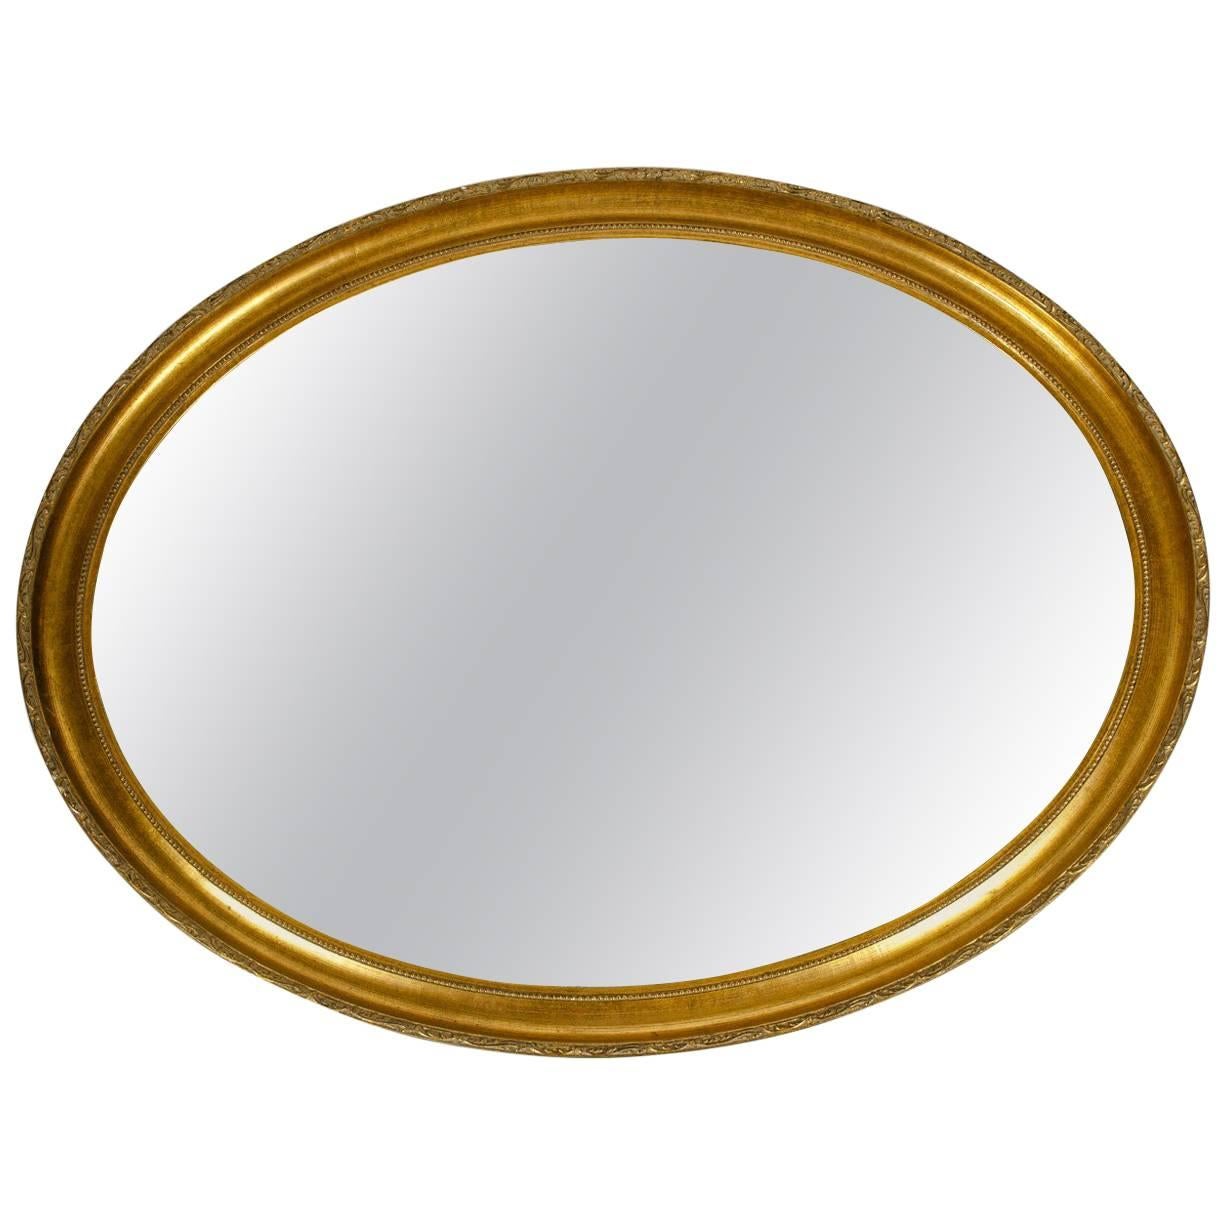 Mid-20th Century Wood Frame Oval Hanging Mirror